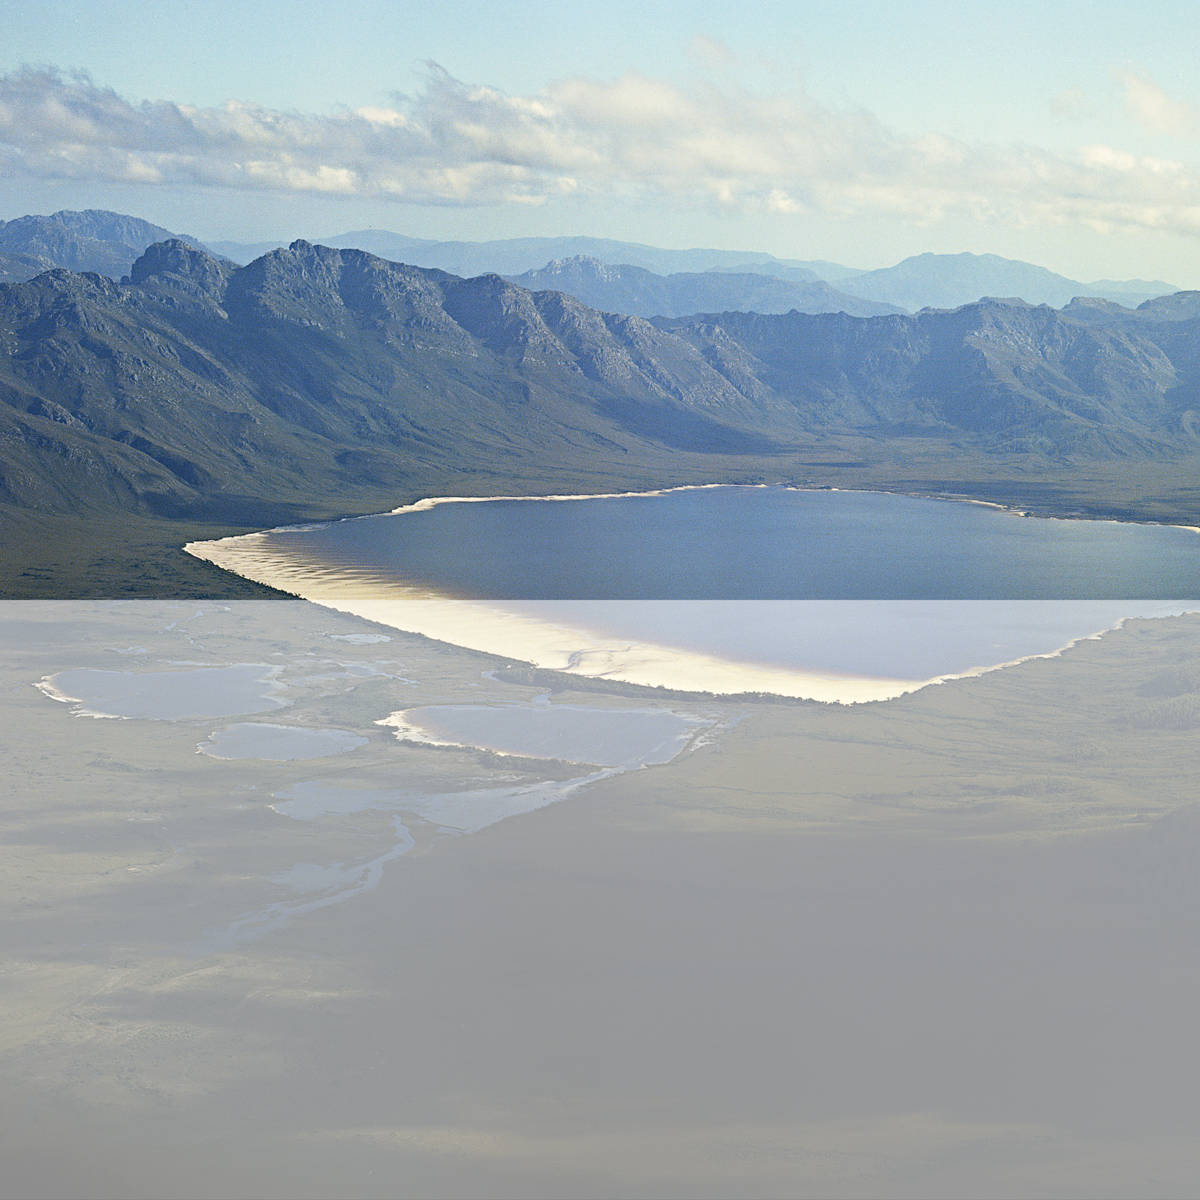 Photograph of the original Lake Pedder by Wilf Elvy taken from a light plane in 1972–73 prior to inundation by the Huon-Serpentine impoundment waters. The rugged Frankland Range is in the background and the three kilometre long, stunning pink quartzite beach sparkles in the foreground.